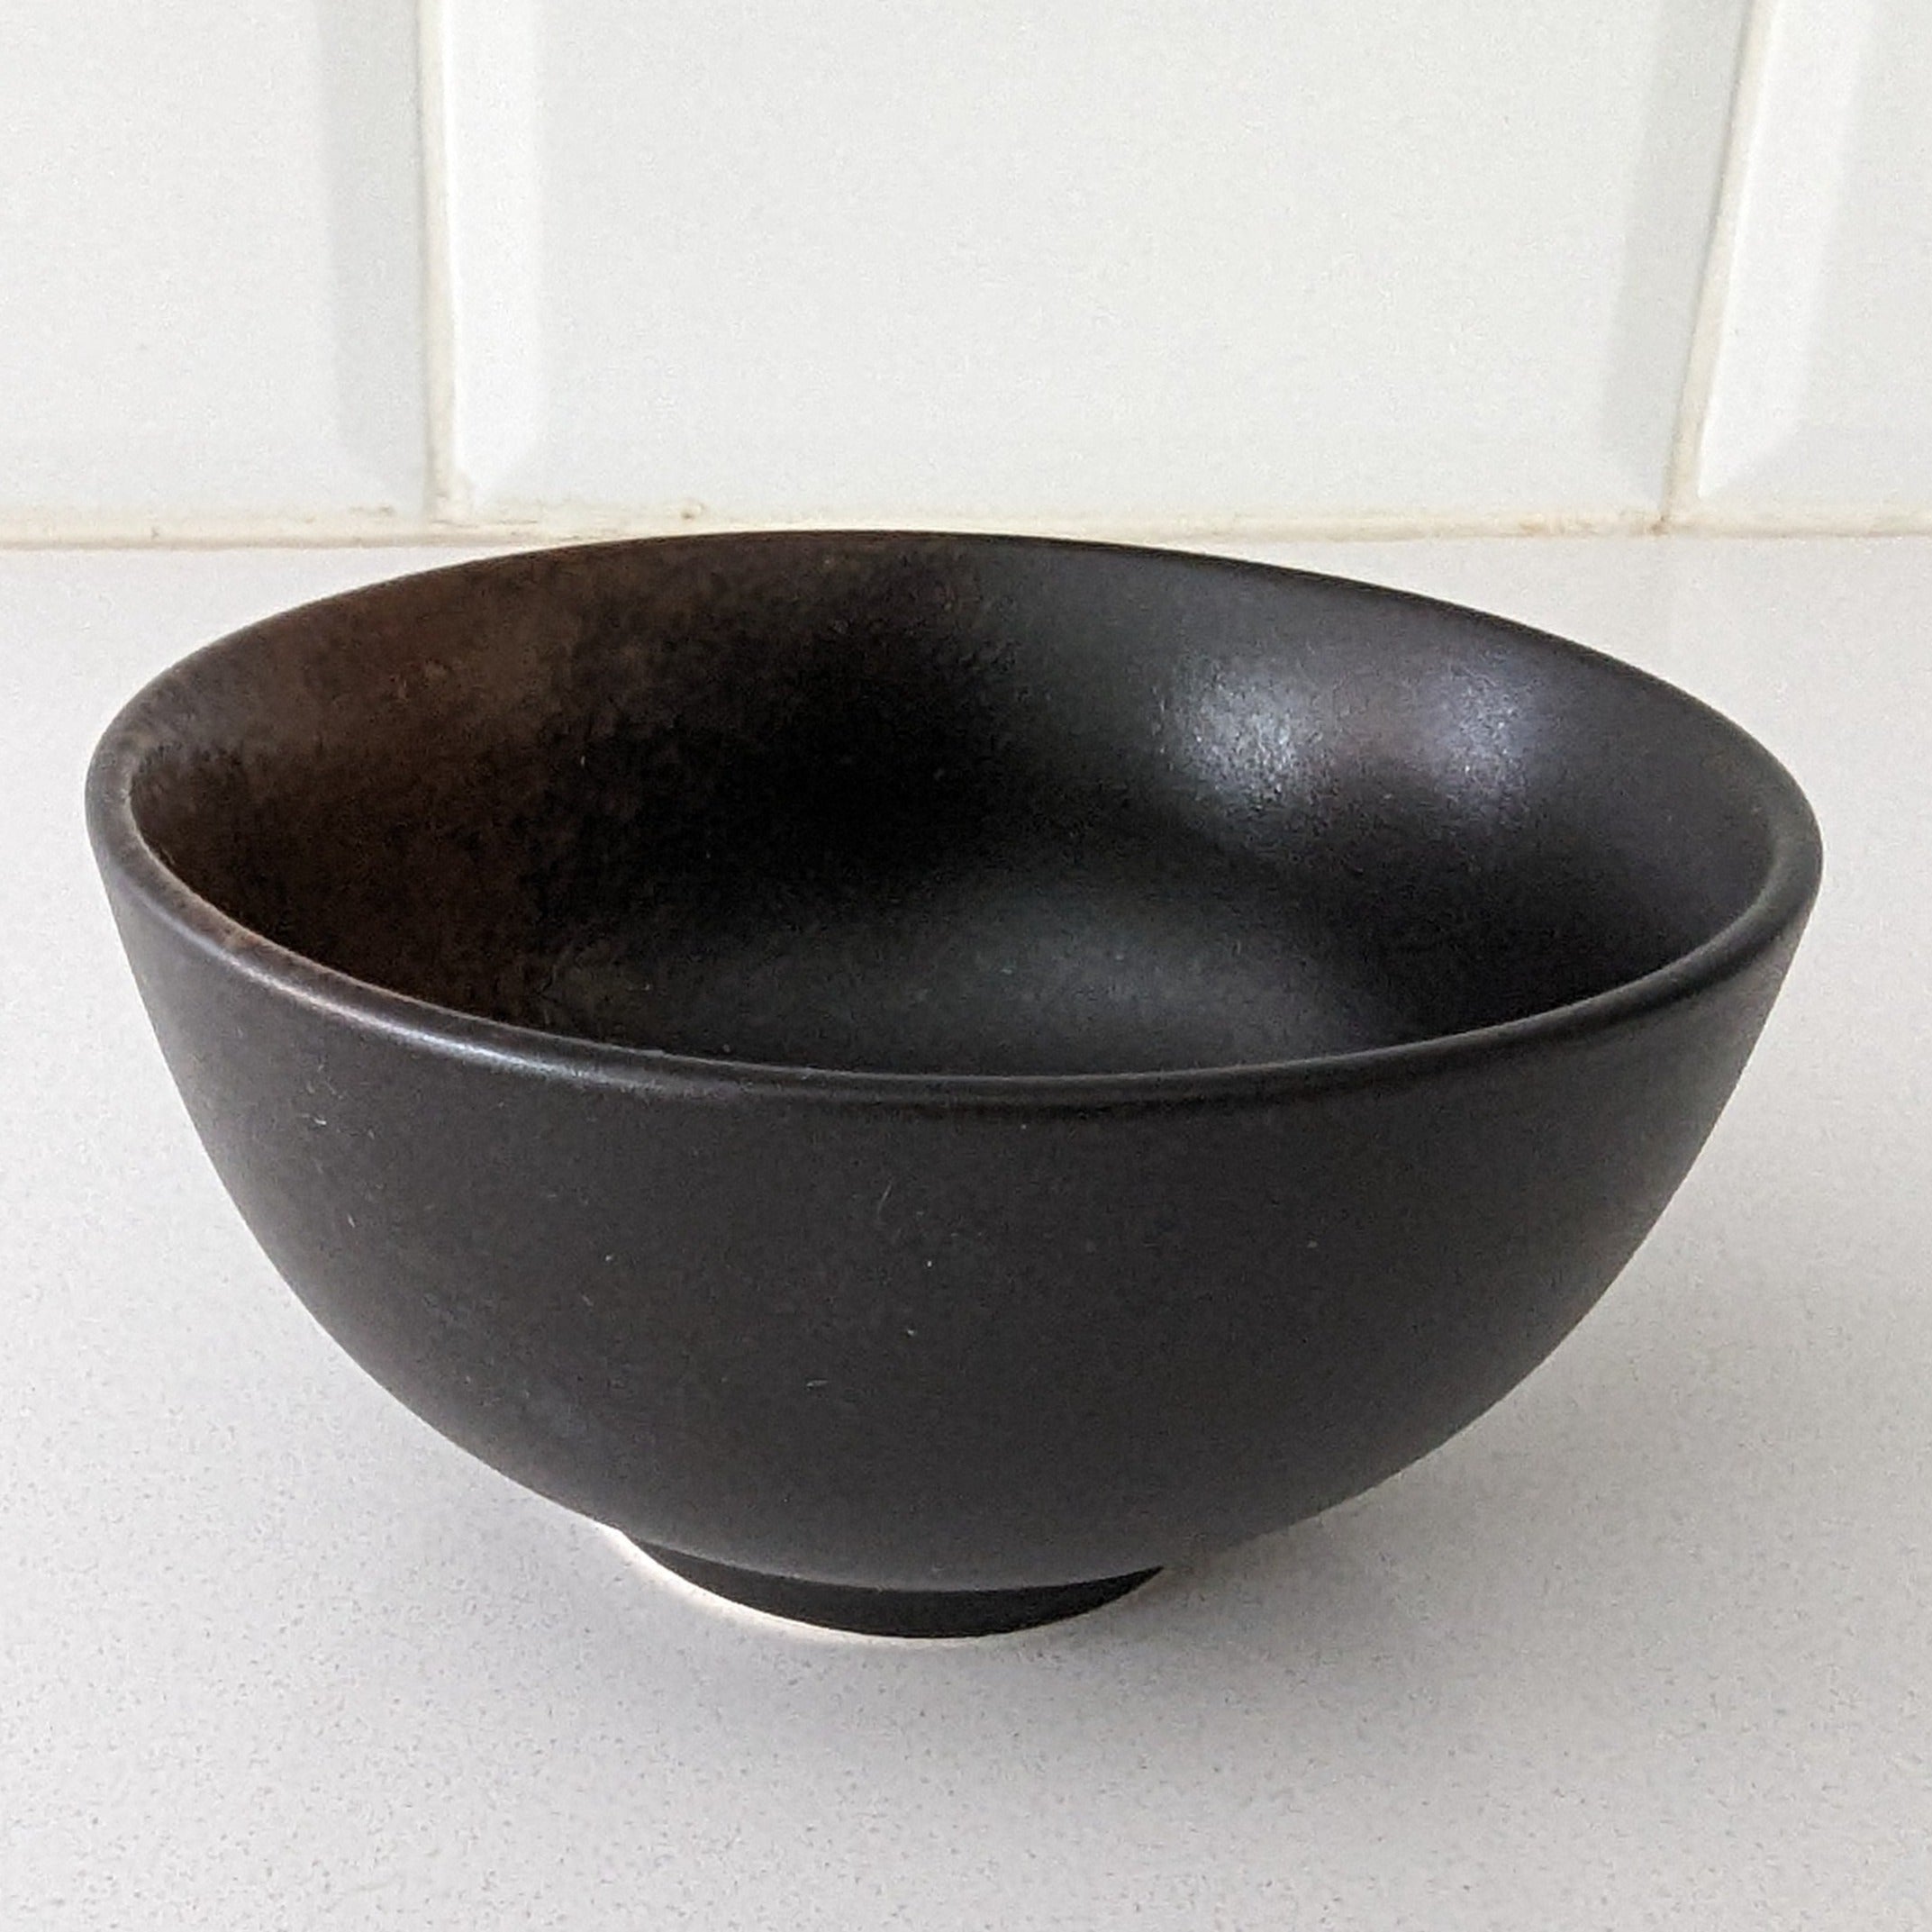 Matcha Bowl (or Chawan) in Black with Brown Detail to One Side. Part of the Matcha Green Tea Gift Set from Very Craftea